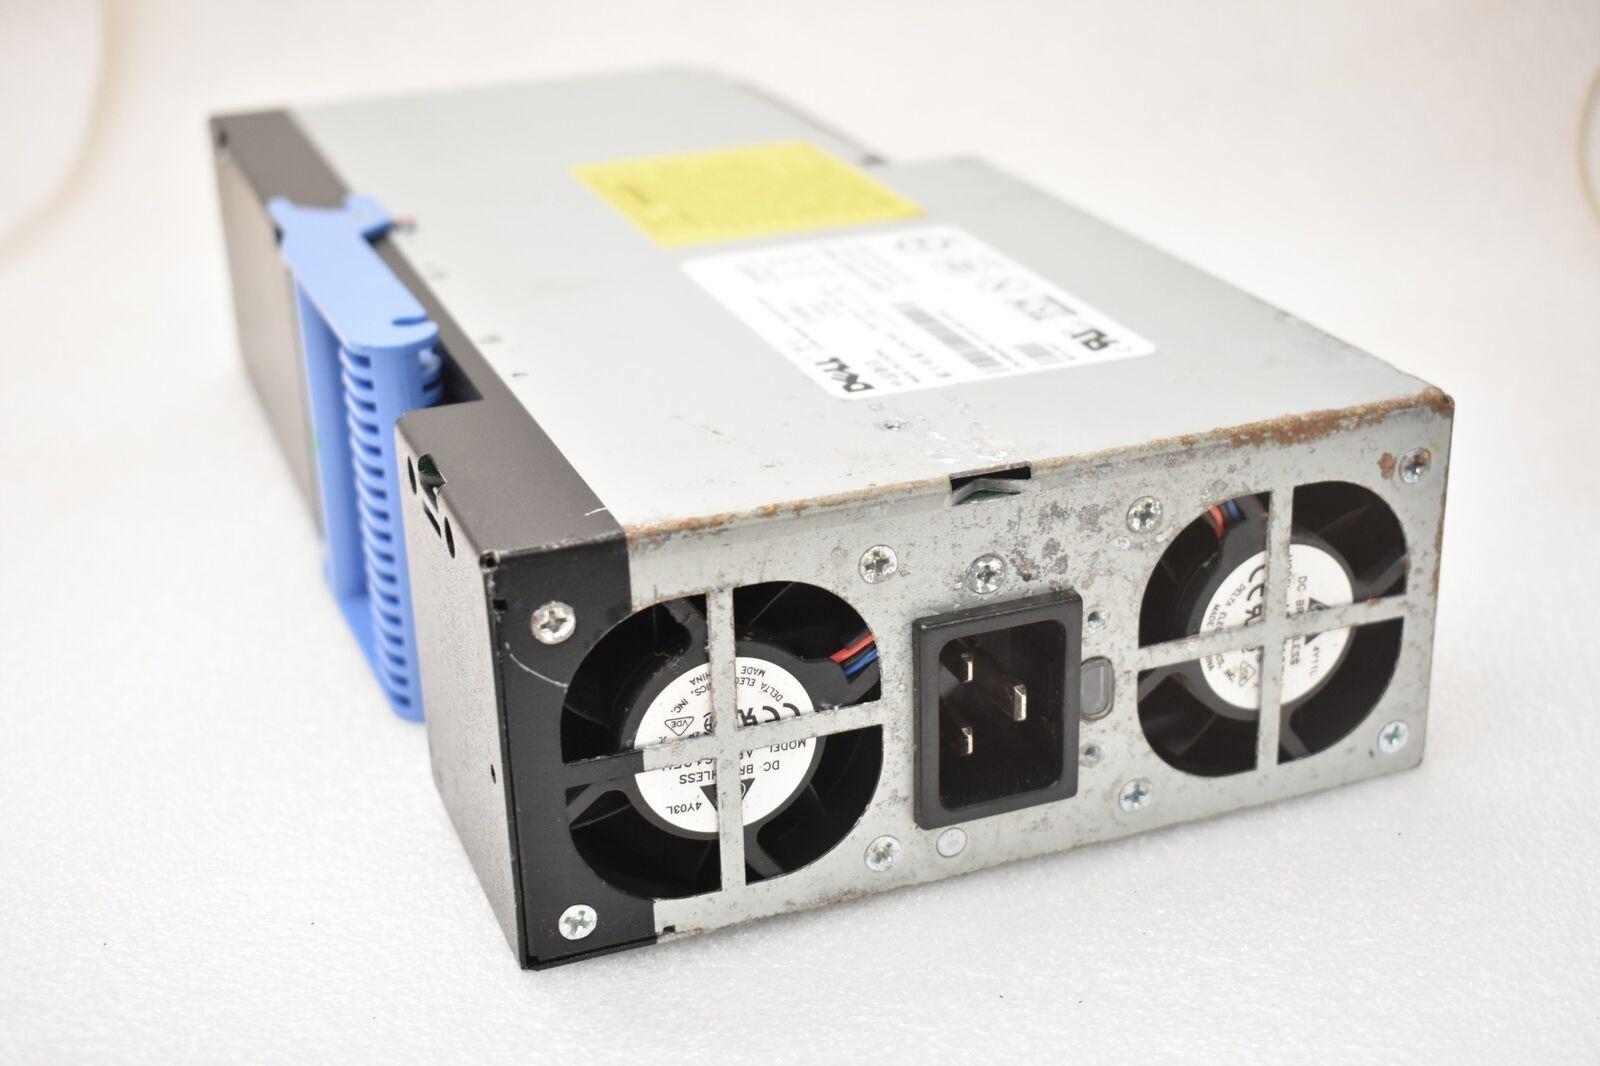 086GNR 7000245 0000 dell 7000245 0000 900w power supply for poweredge 6650